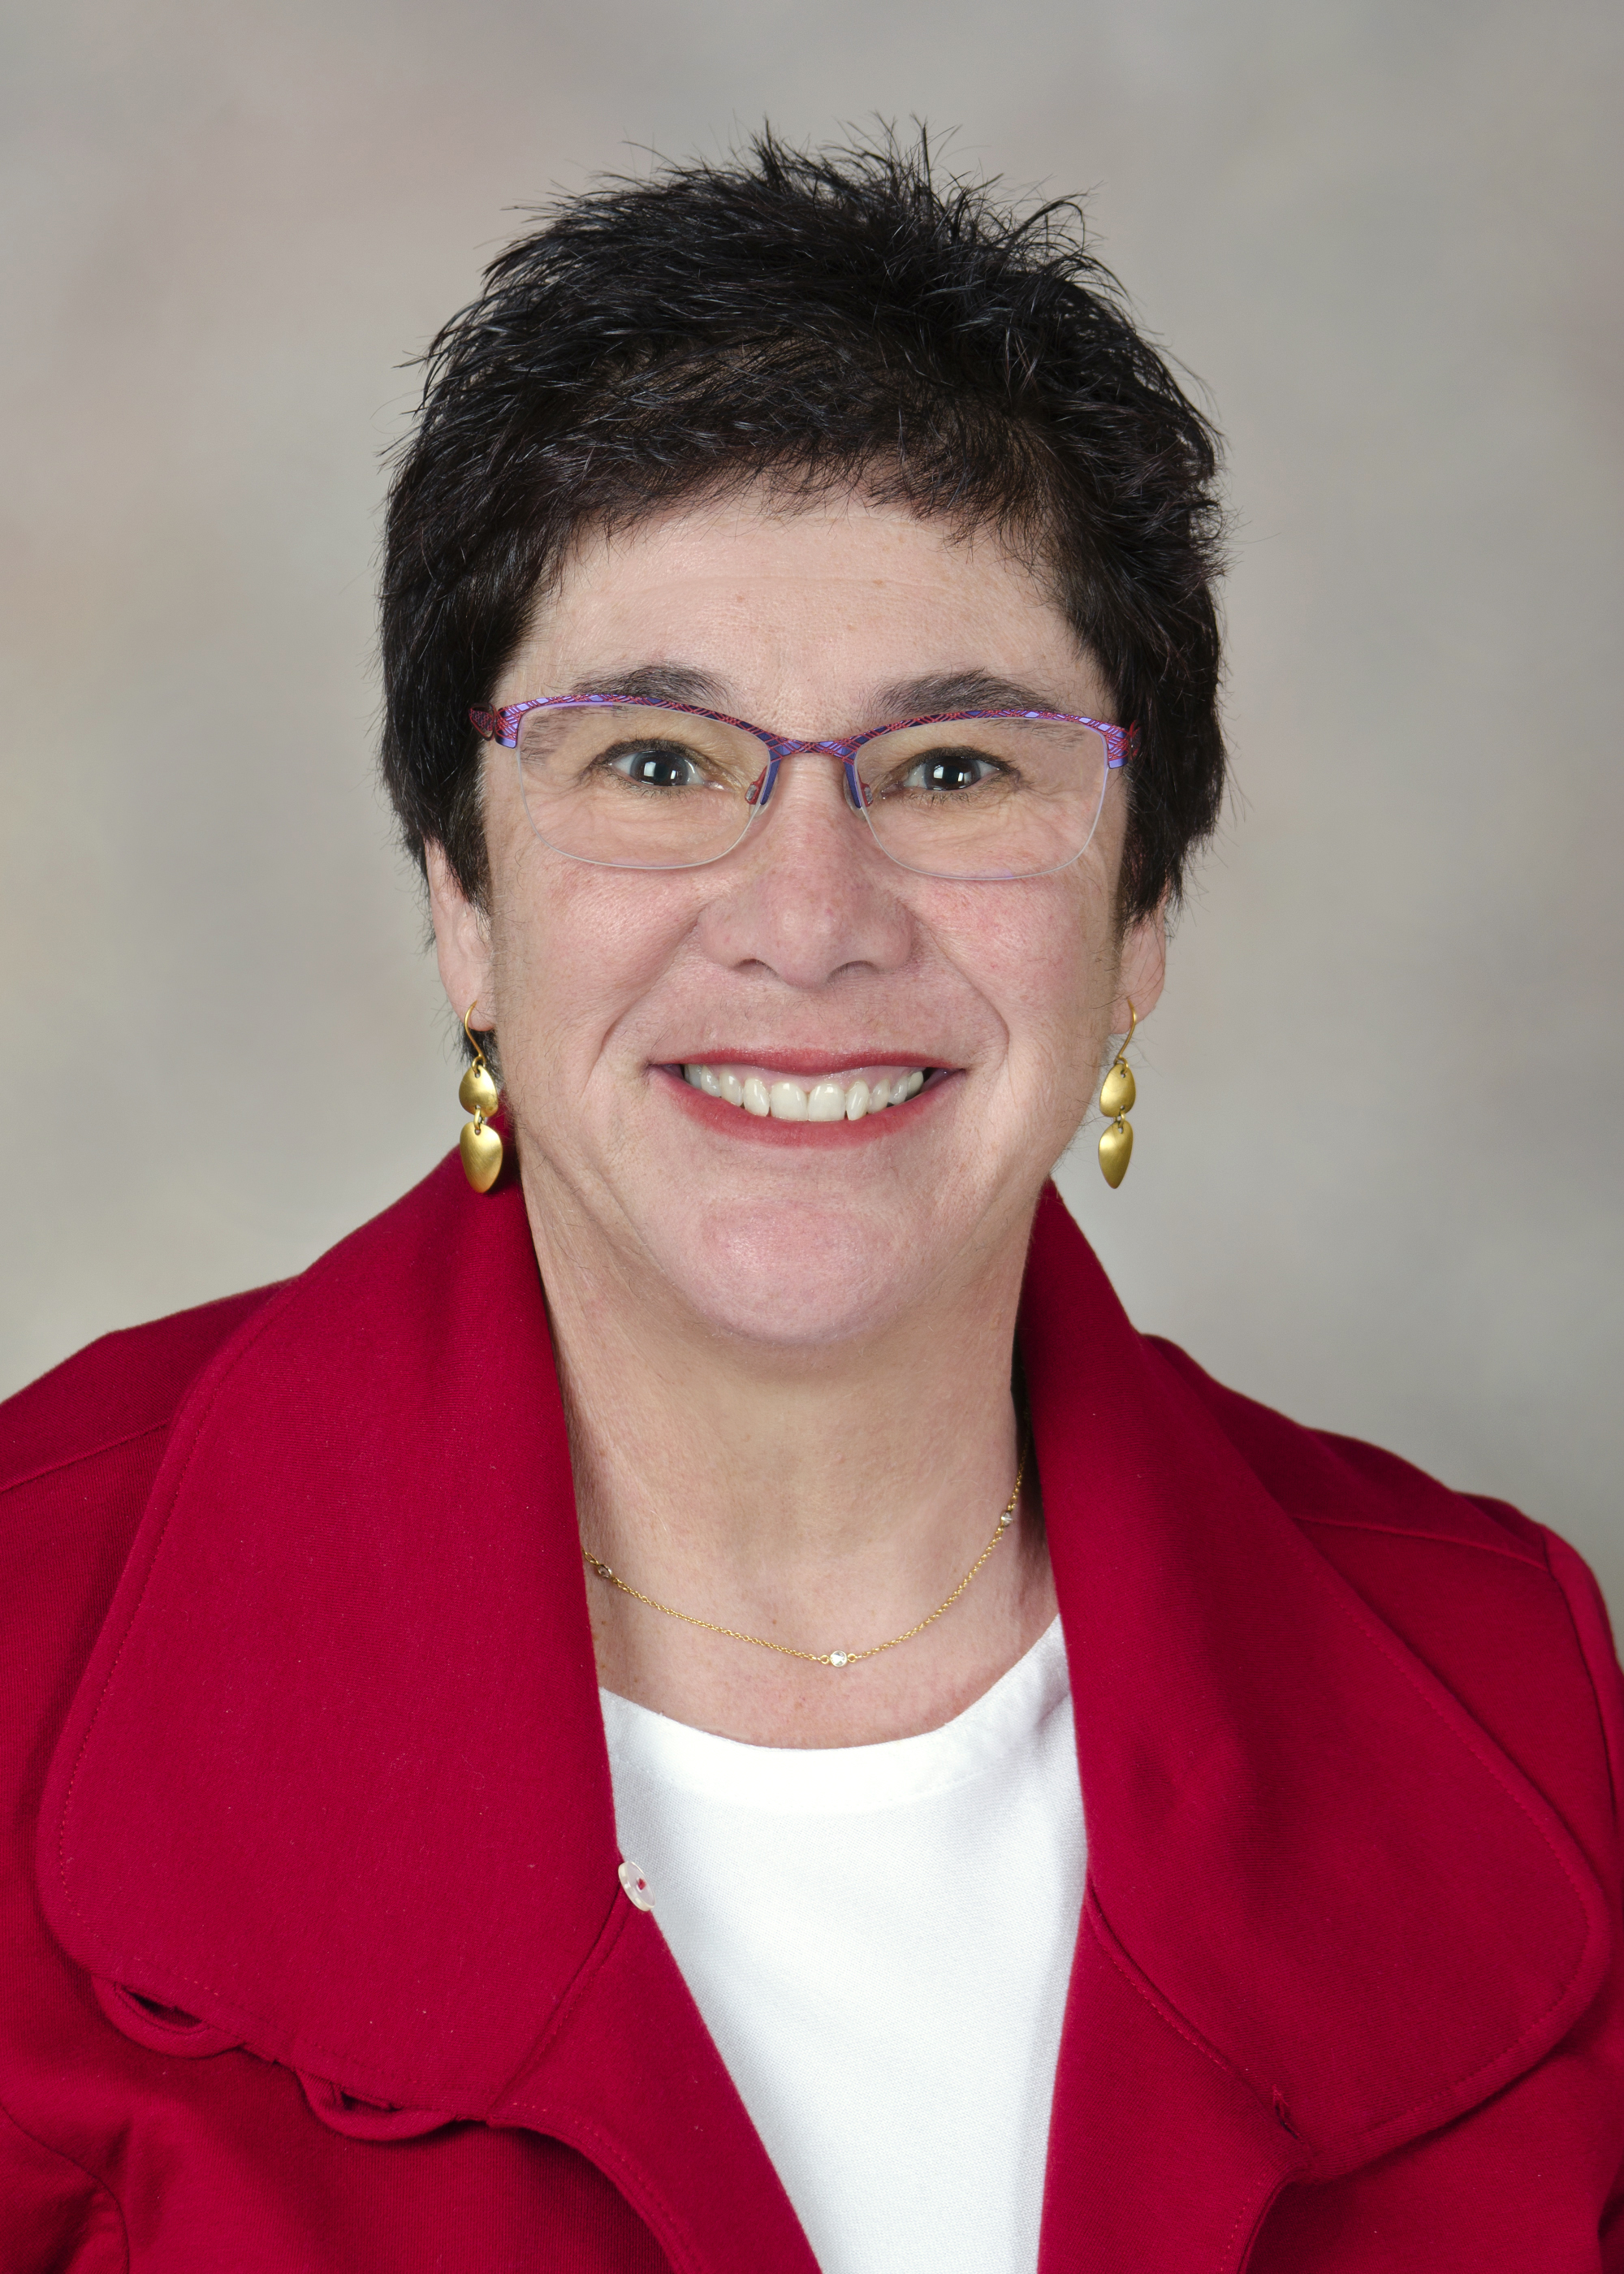 This is an image of Dr. Melanie Fried-Oken, a smiling woman in her 60's with short dark hair and a red jacket.